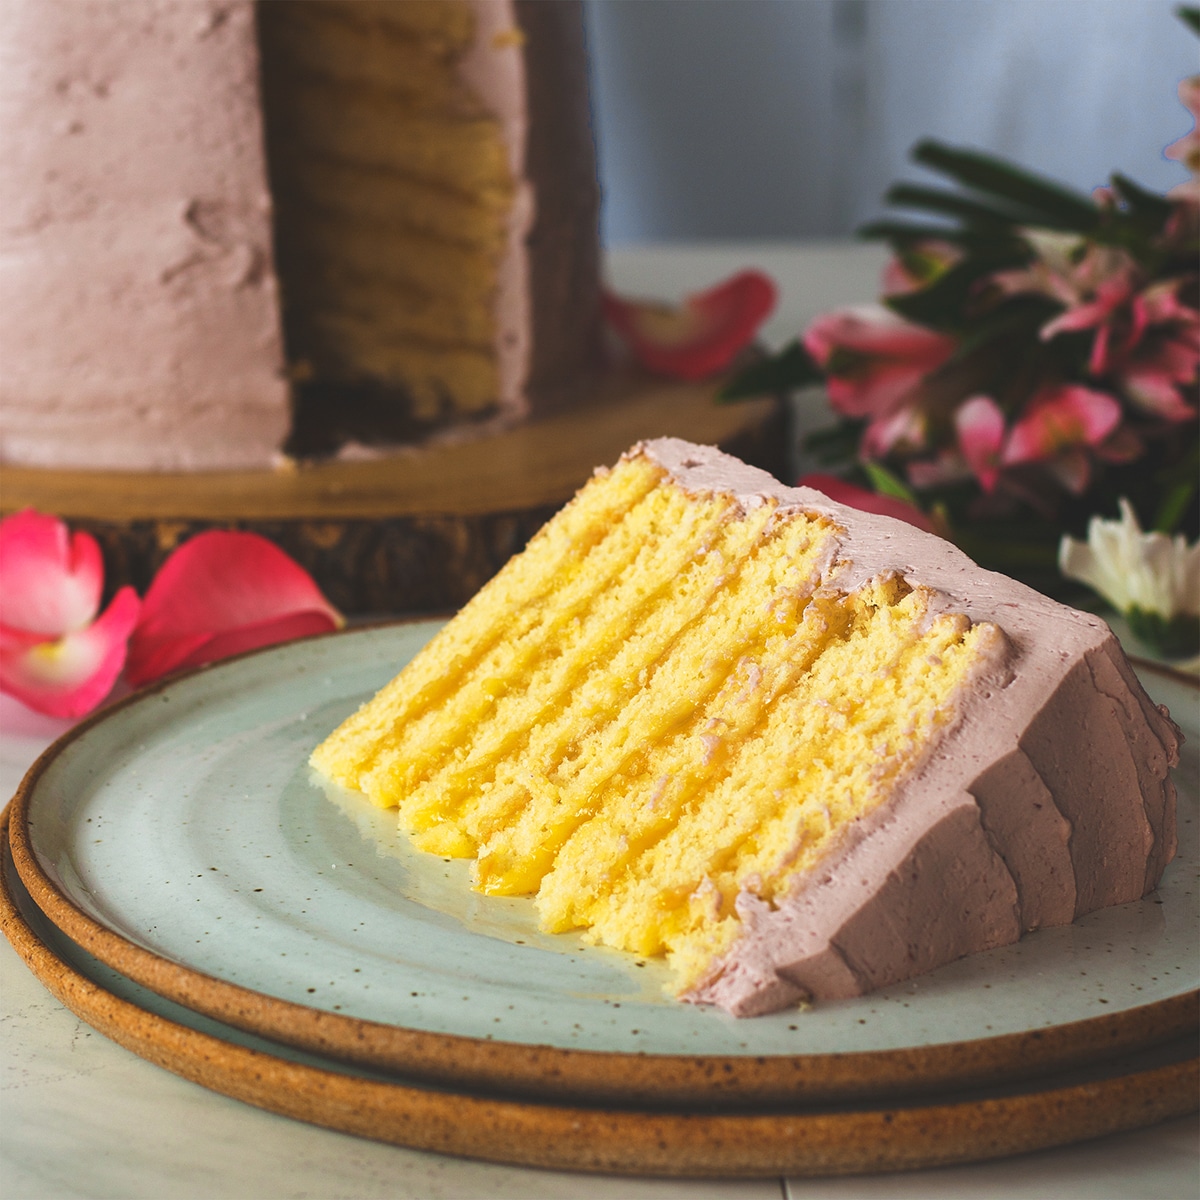 A slice of lemon layer cake on a plate, ready to eat.